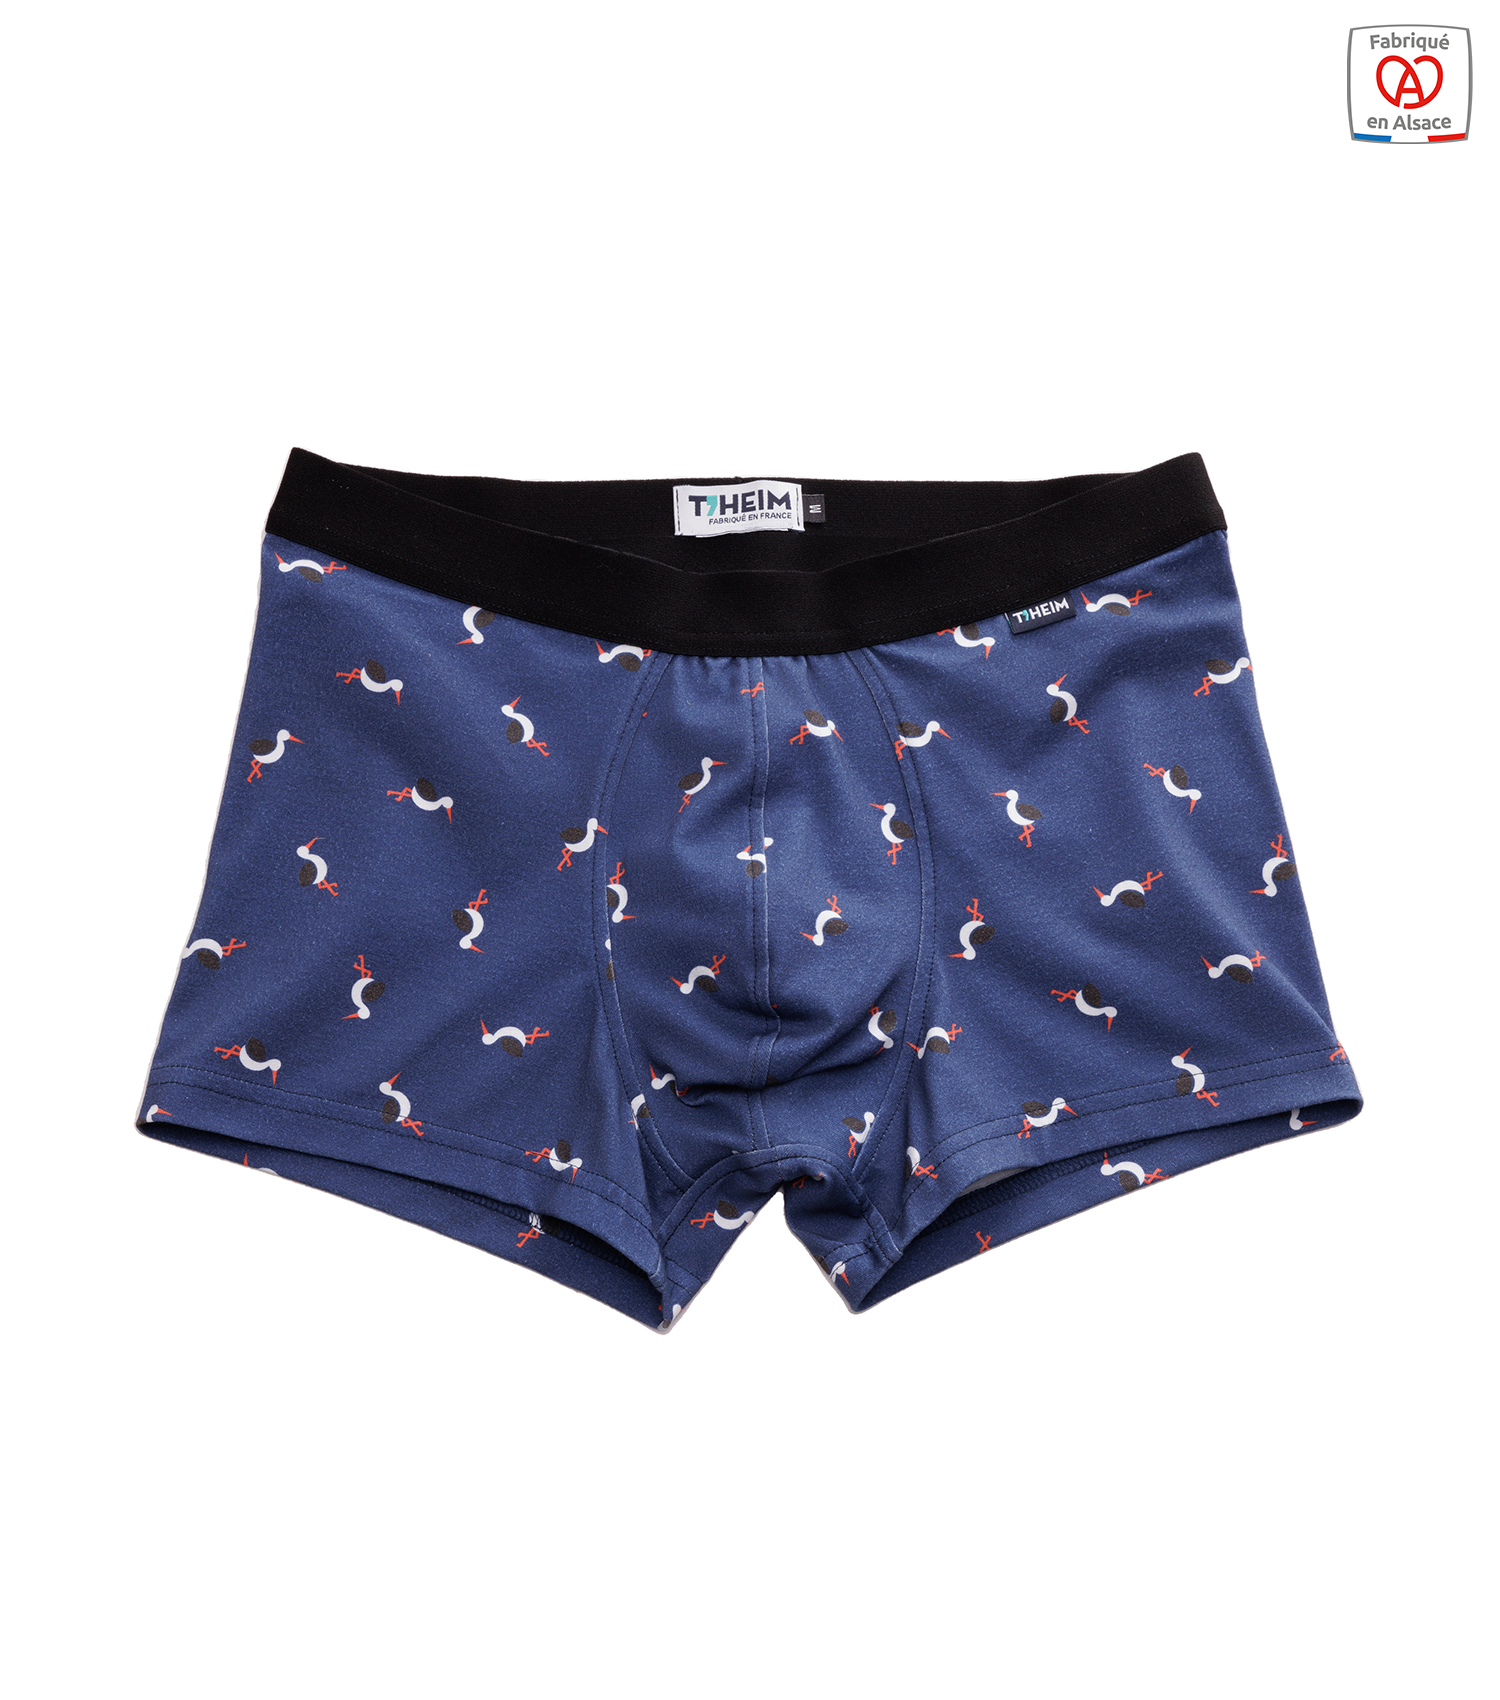 theim-boxer-cigogne-made-in-france-1500-x-1700-px